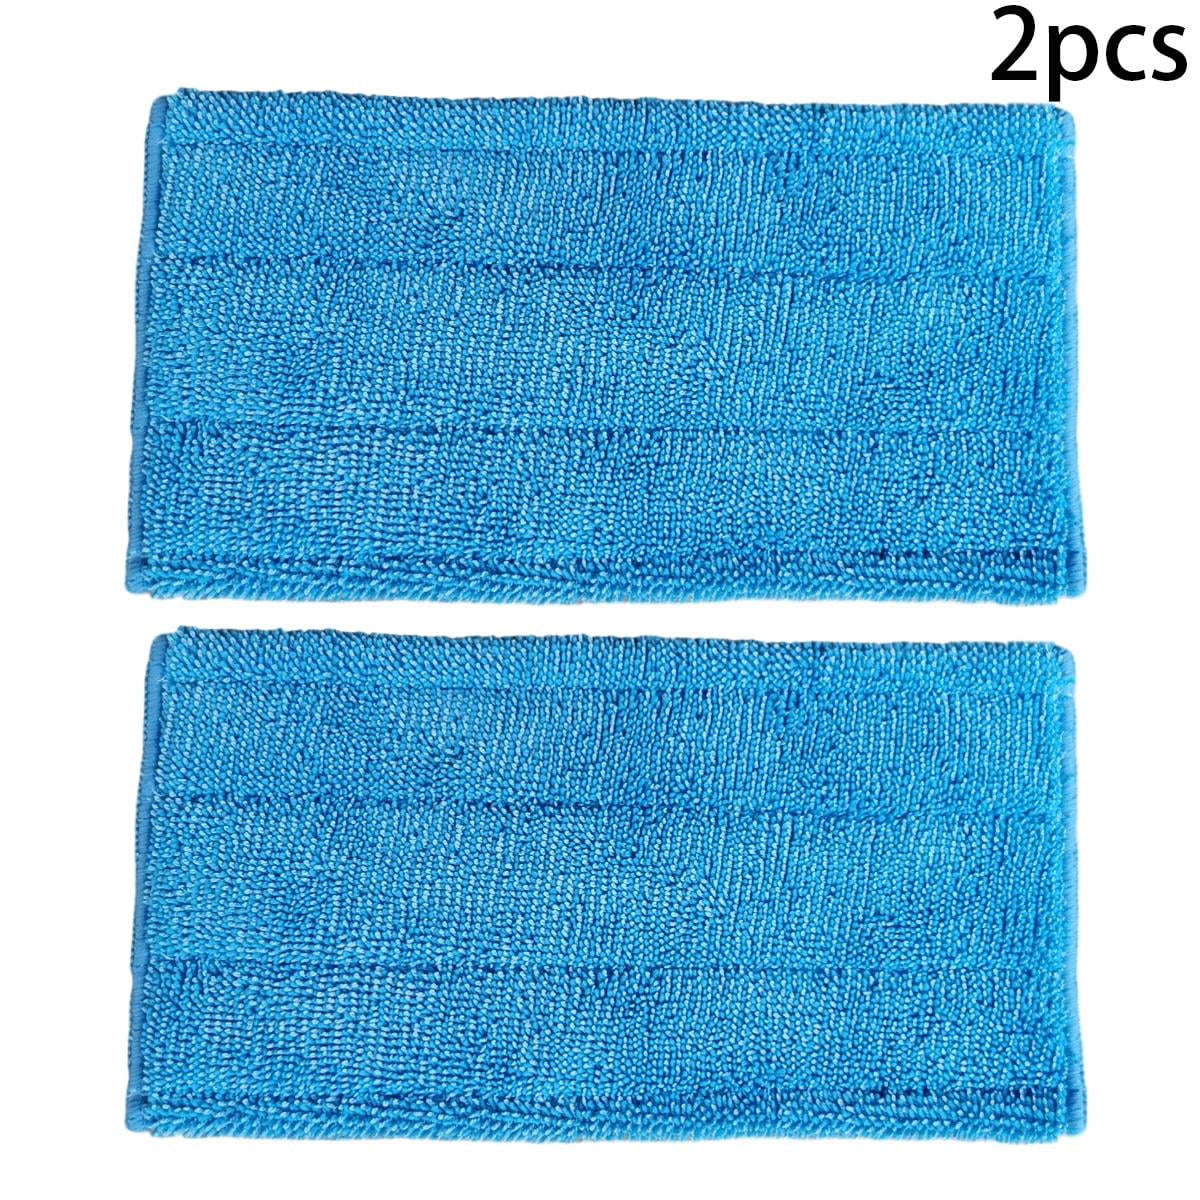 TSV 4Pcs Cleaning Pads Fit for Swiffer Sweeper Mop, Microfiber